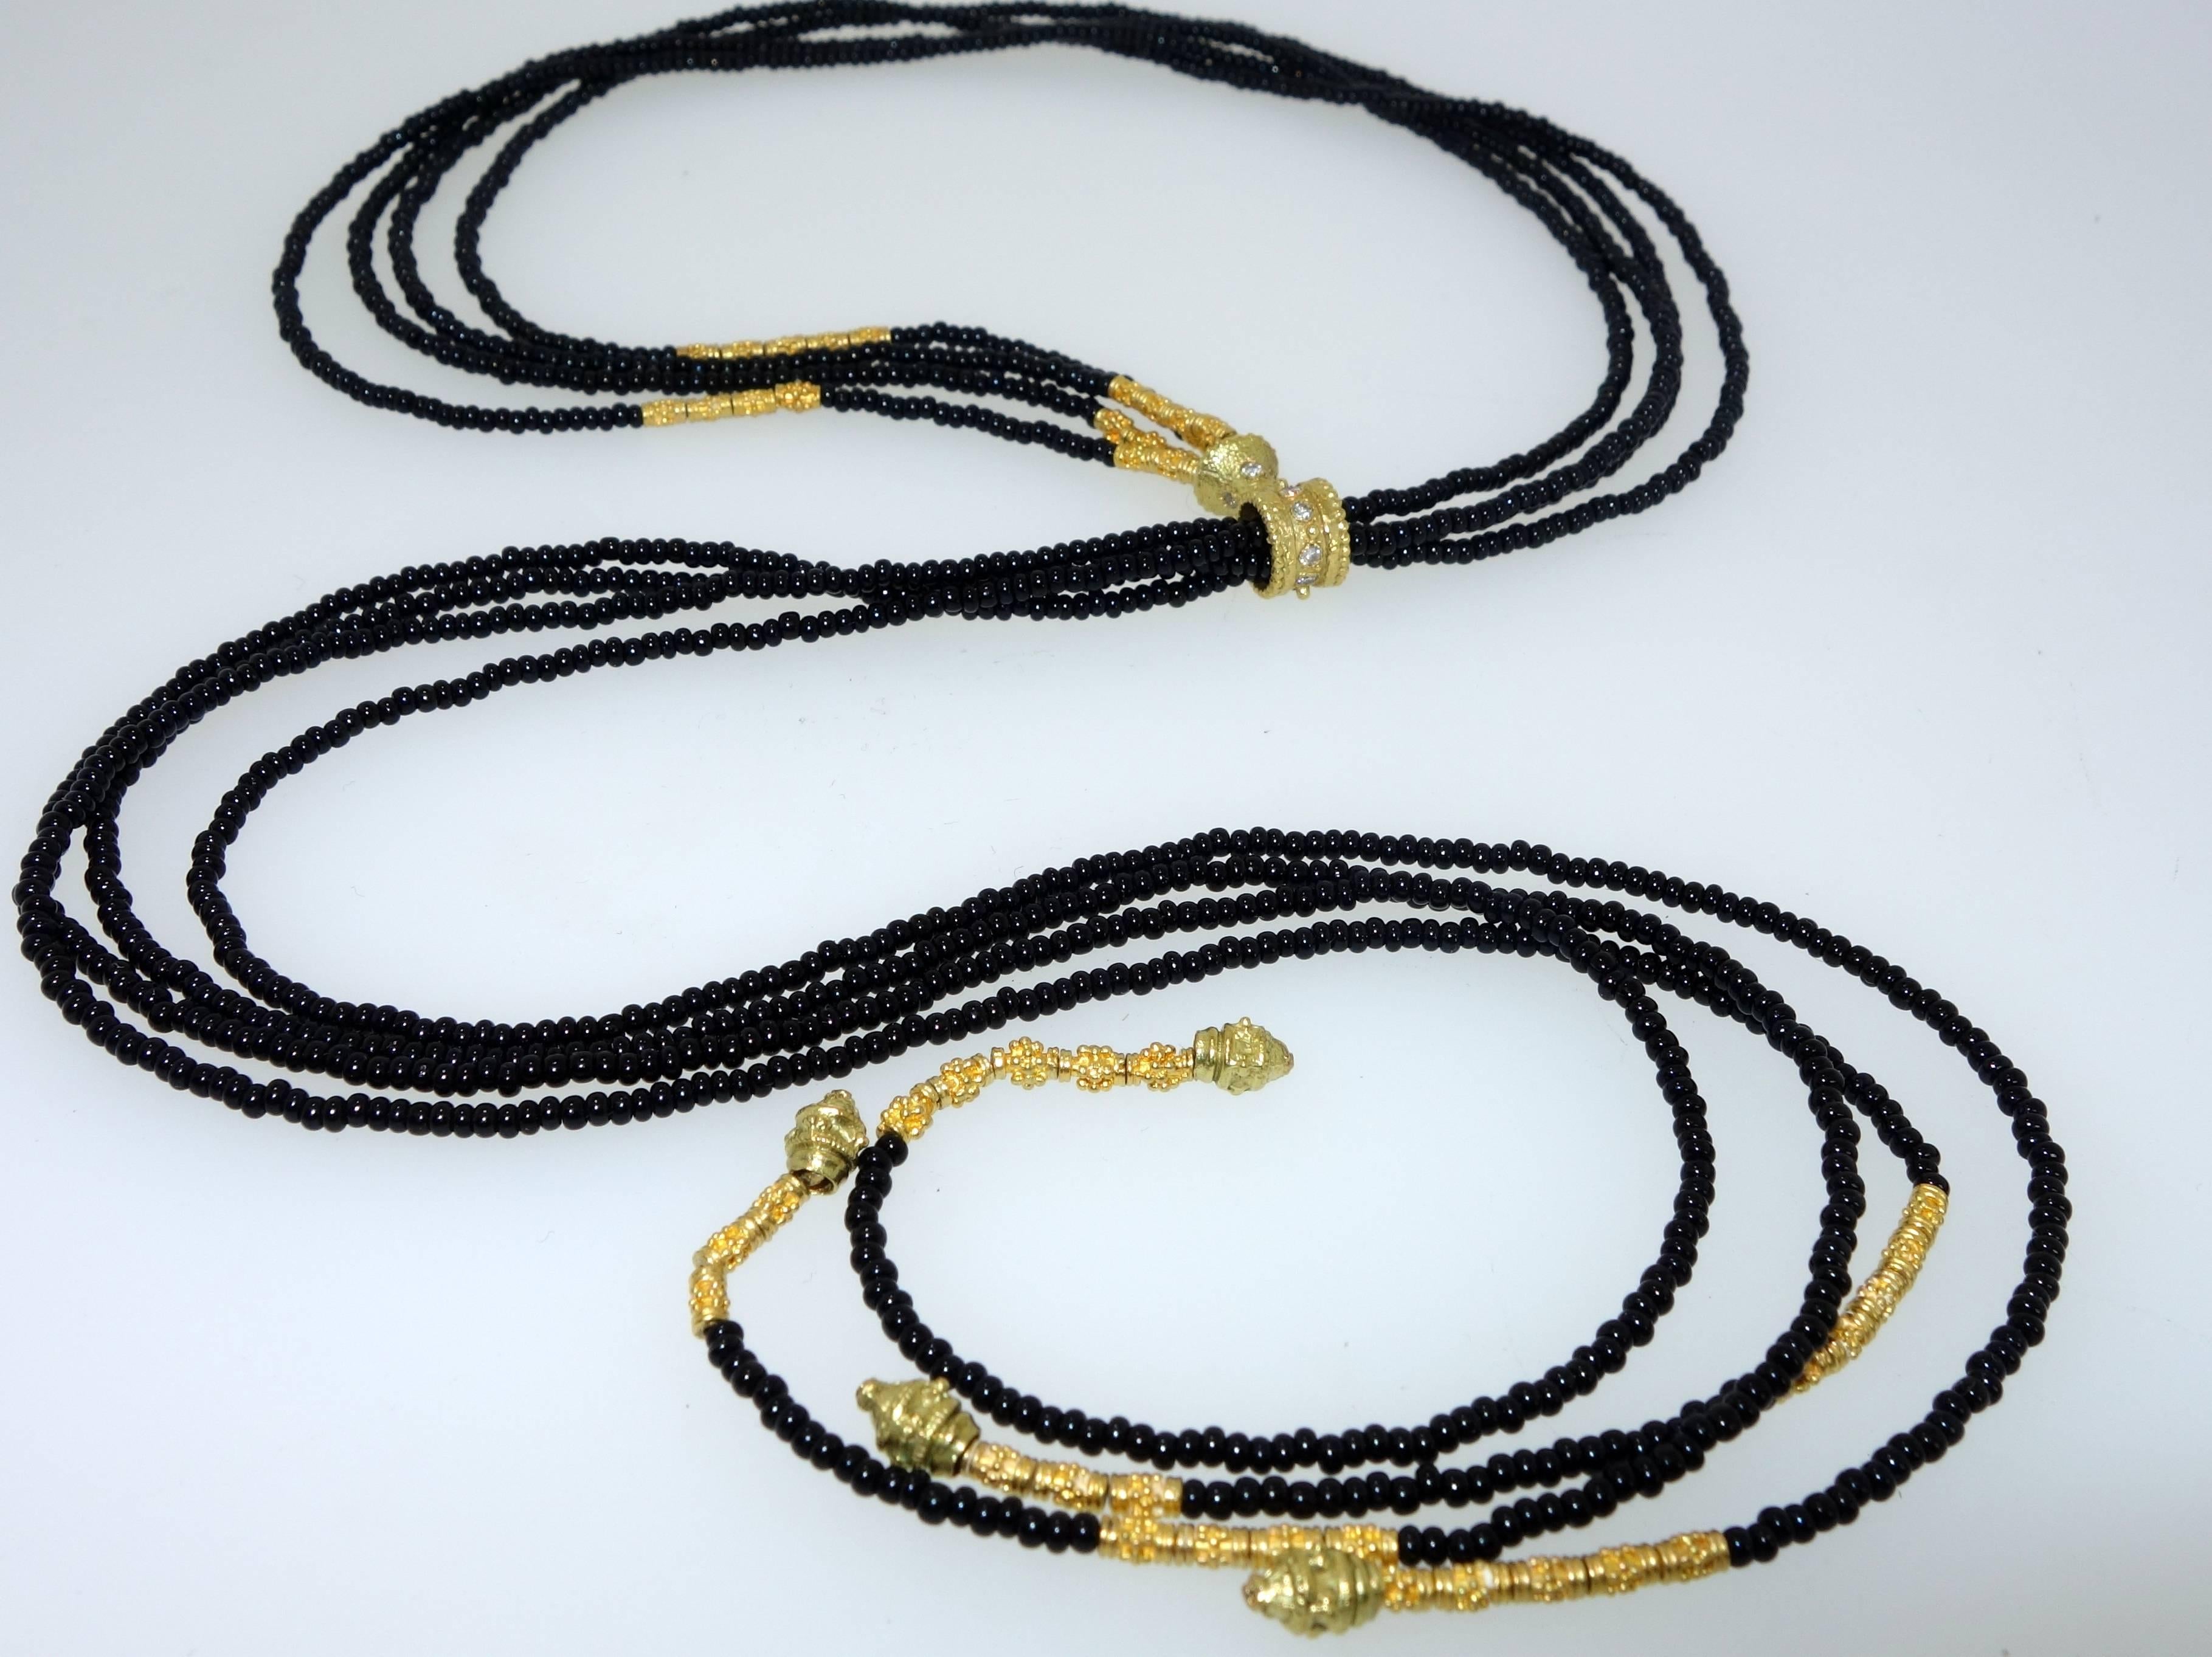 14 small diamonds adorn this unusual necklace.  The four strands of onyx beads terminate with hand made gold elements.  The gold sliding clasp in the center can be adjusted and worn closer around the neck or looser depending on the wearer's wish. 